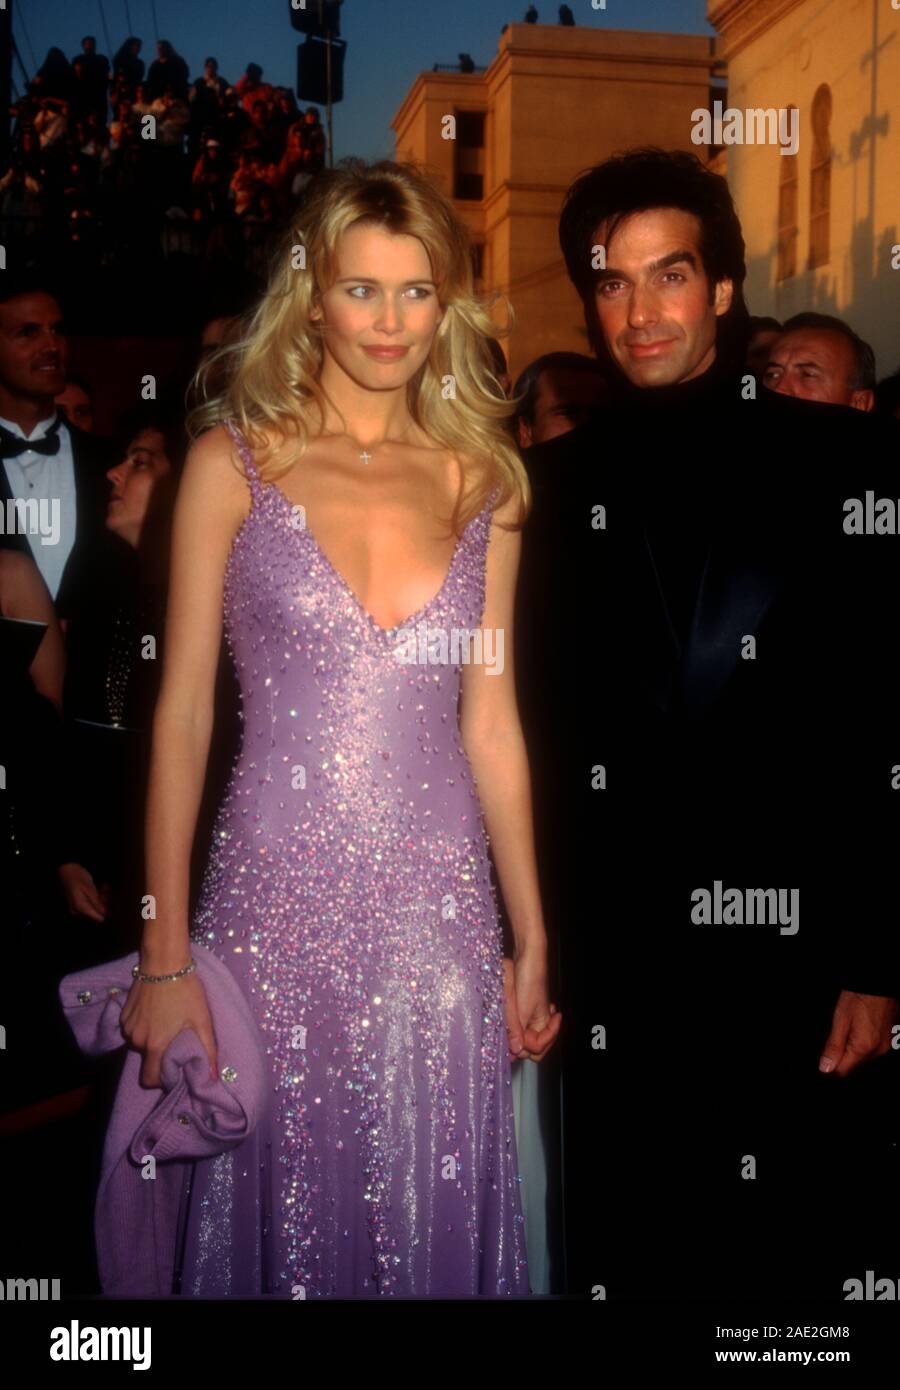 Los Angeles, California, USA 27th March 1995 Model Claudia Schiffer and magician David Copperfield attend the 67th Annual Academy Awards on March 27, 1995 at the Shrine Auditorium in Los Angeles, California, USA. Photo by Barry King/Alamy Stock Photo Stock Photo